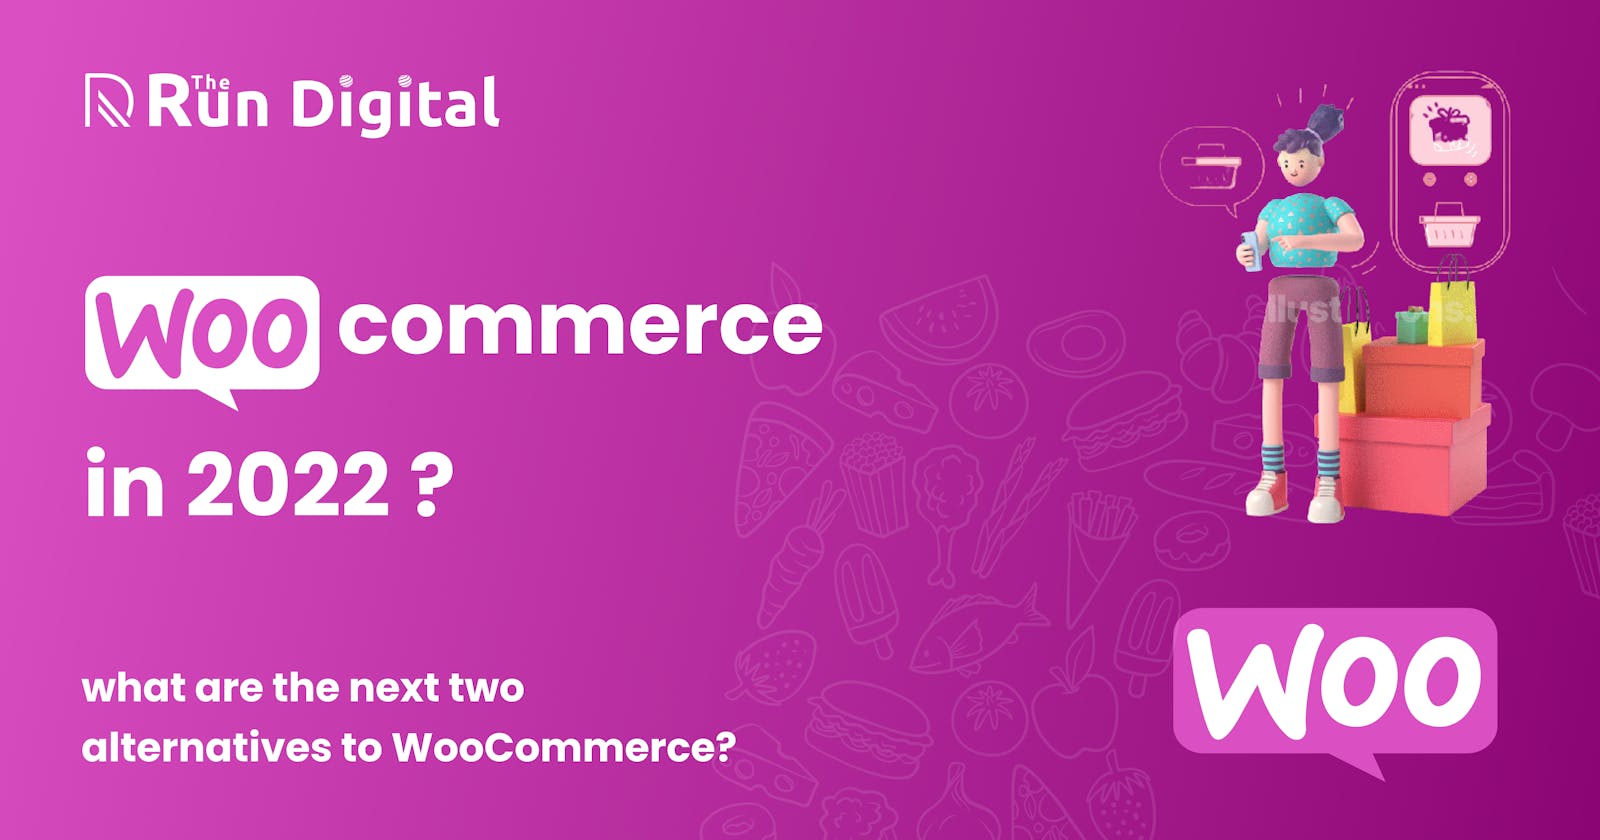 Should you use WooCommerce in 2022? If not, what are the next two alternatives to WooCommerce?